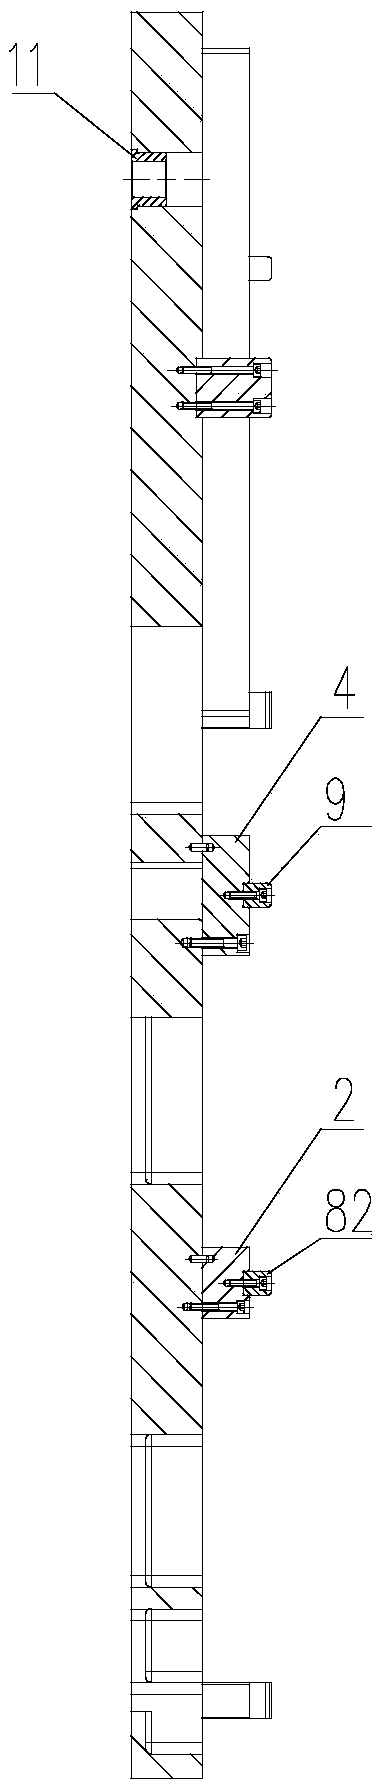 Tray for robotic automatic core arrangement applicable to collinear production of cylinder body cover cores